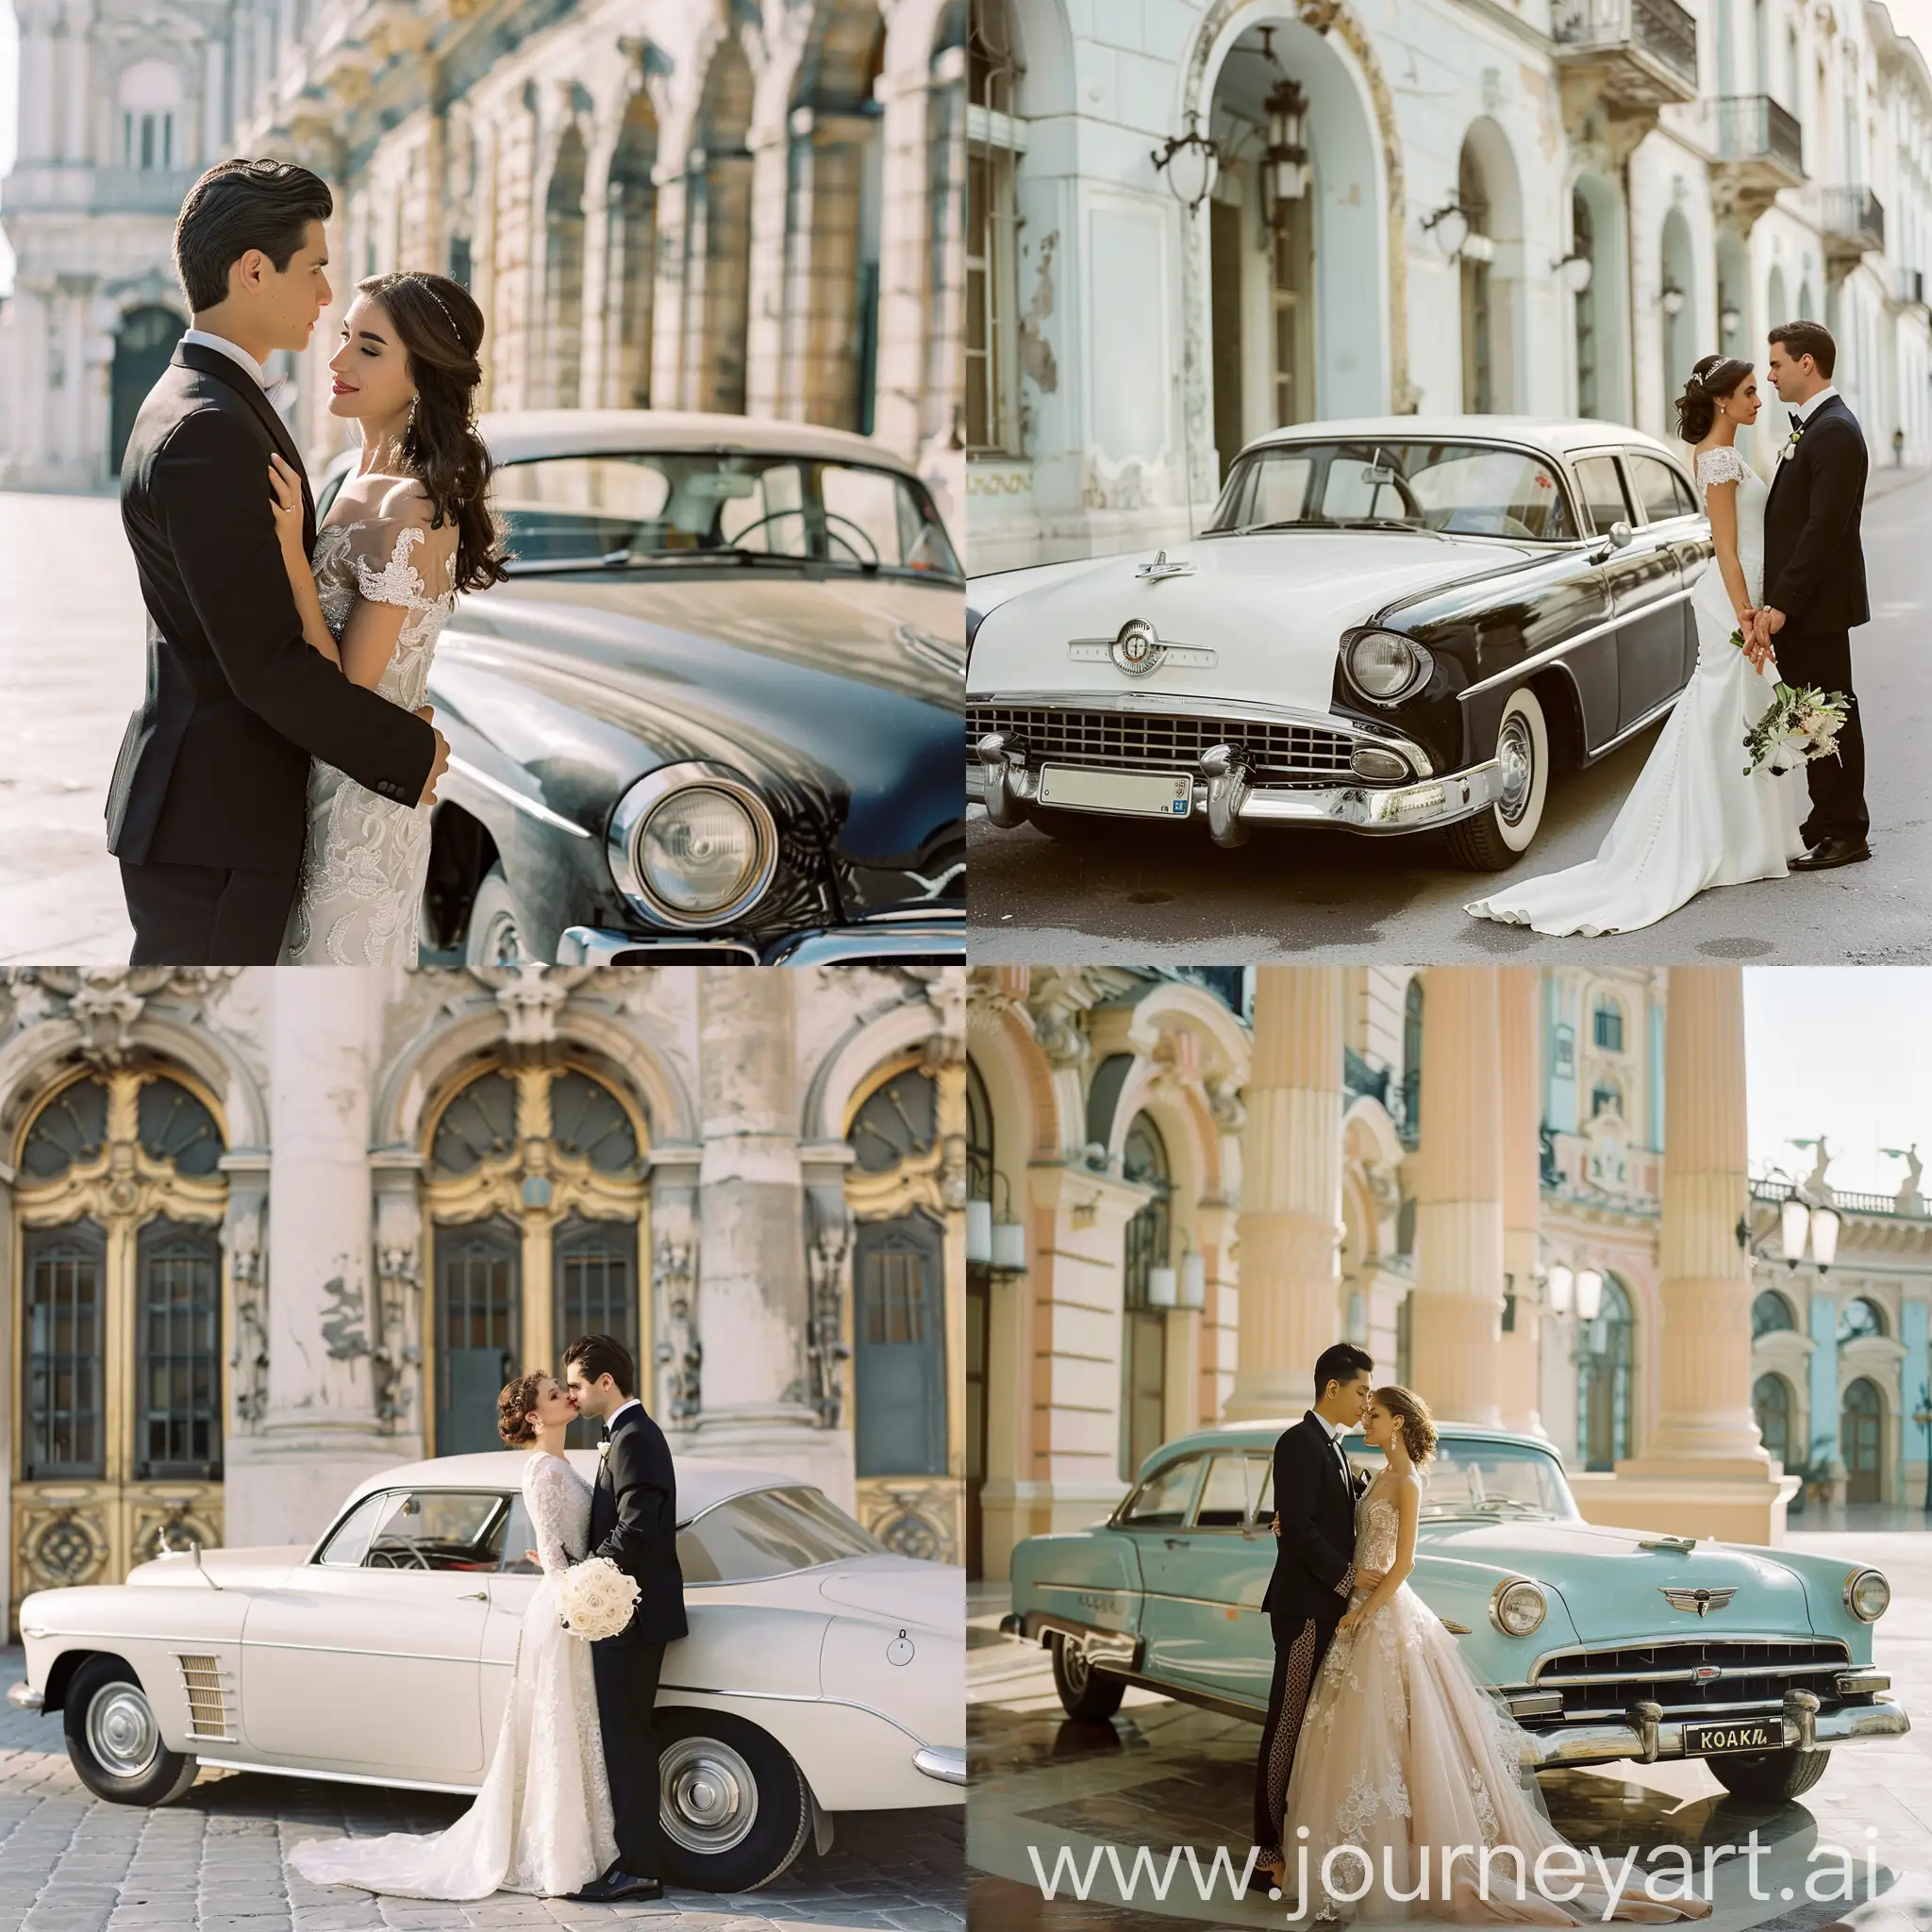 Classic-Wedding-Photoshoot-at-Historic-Building-with-Vintage-Car